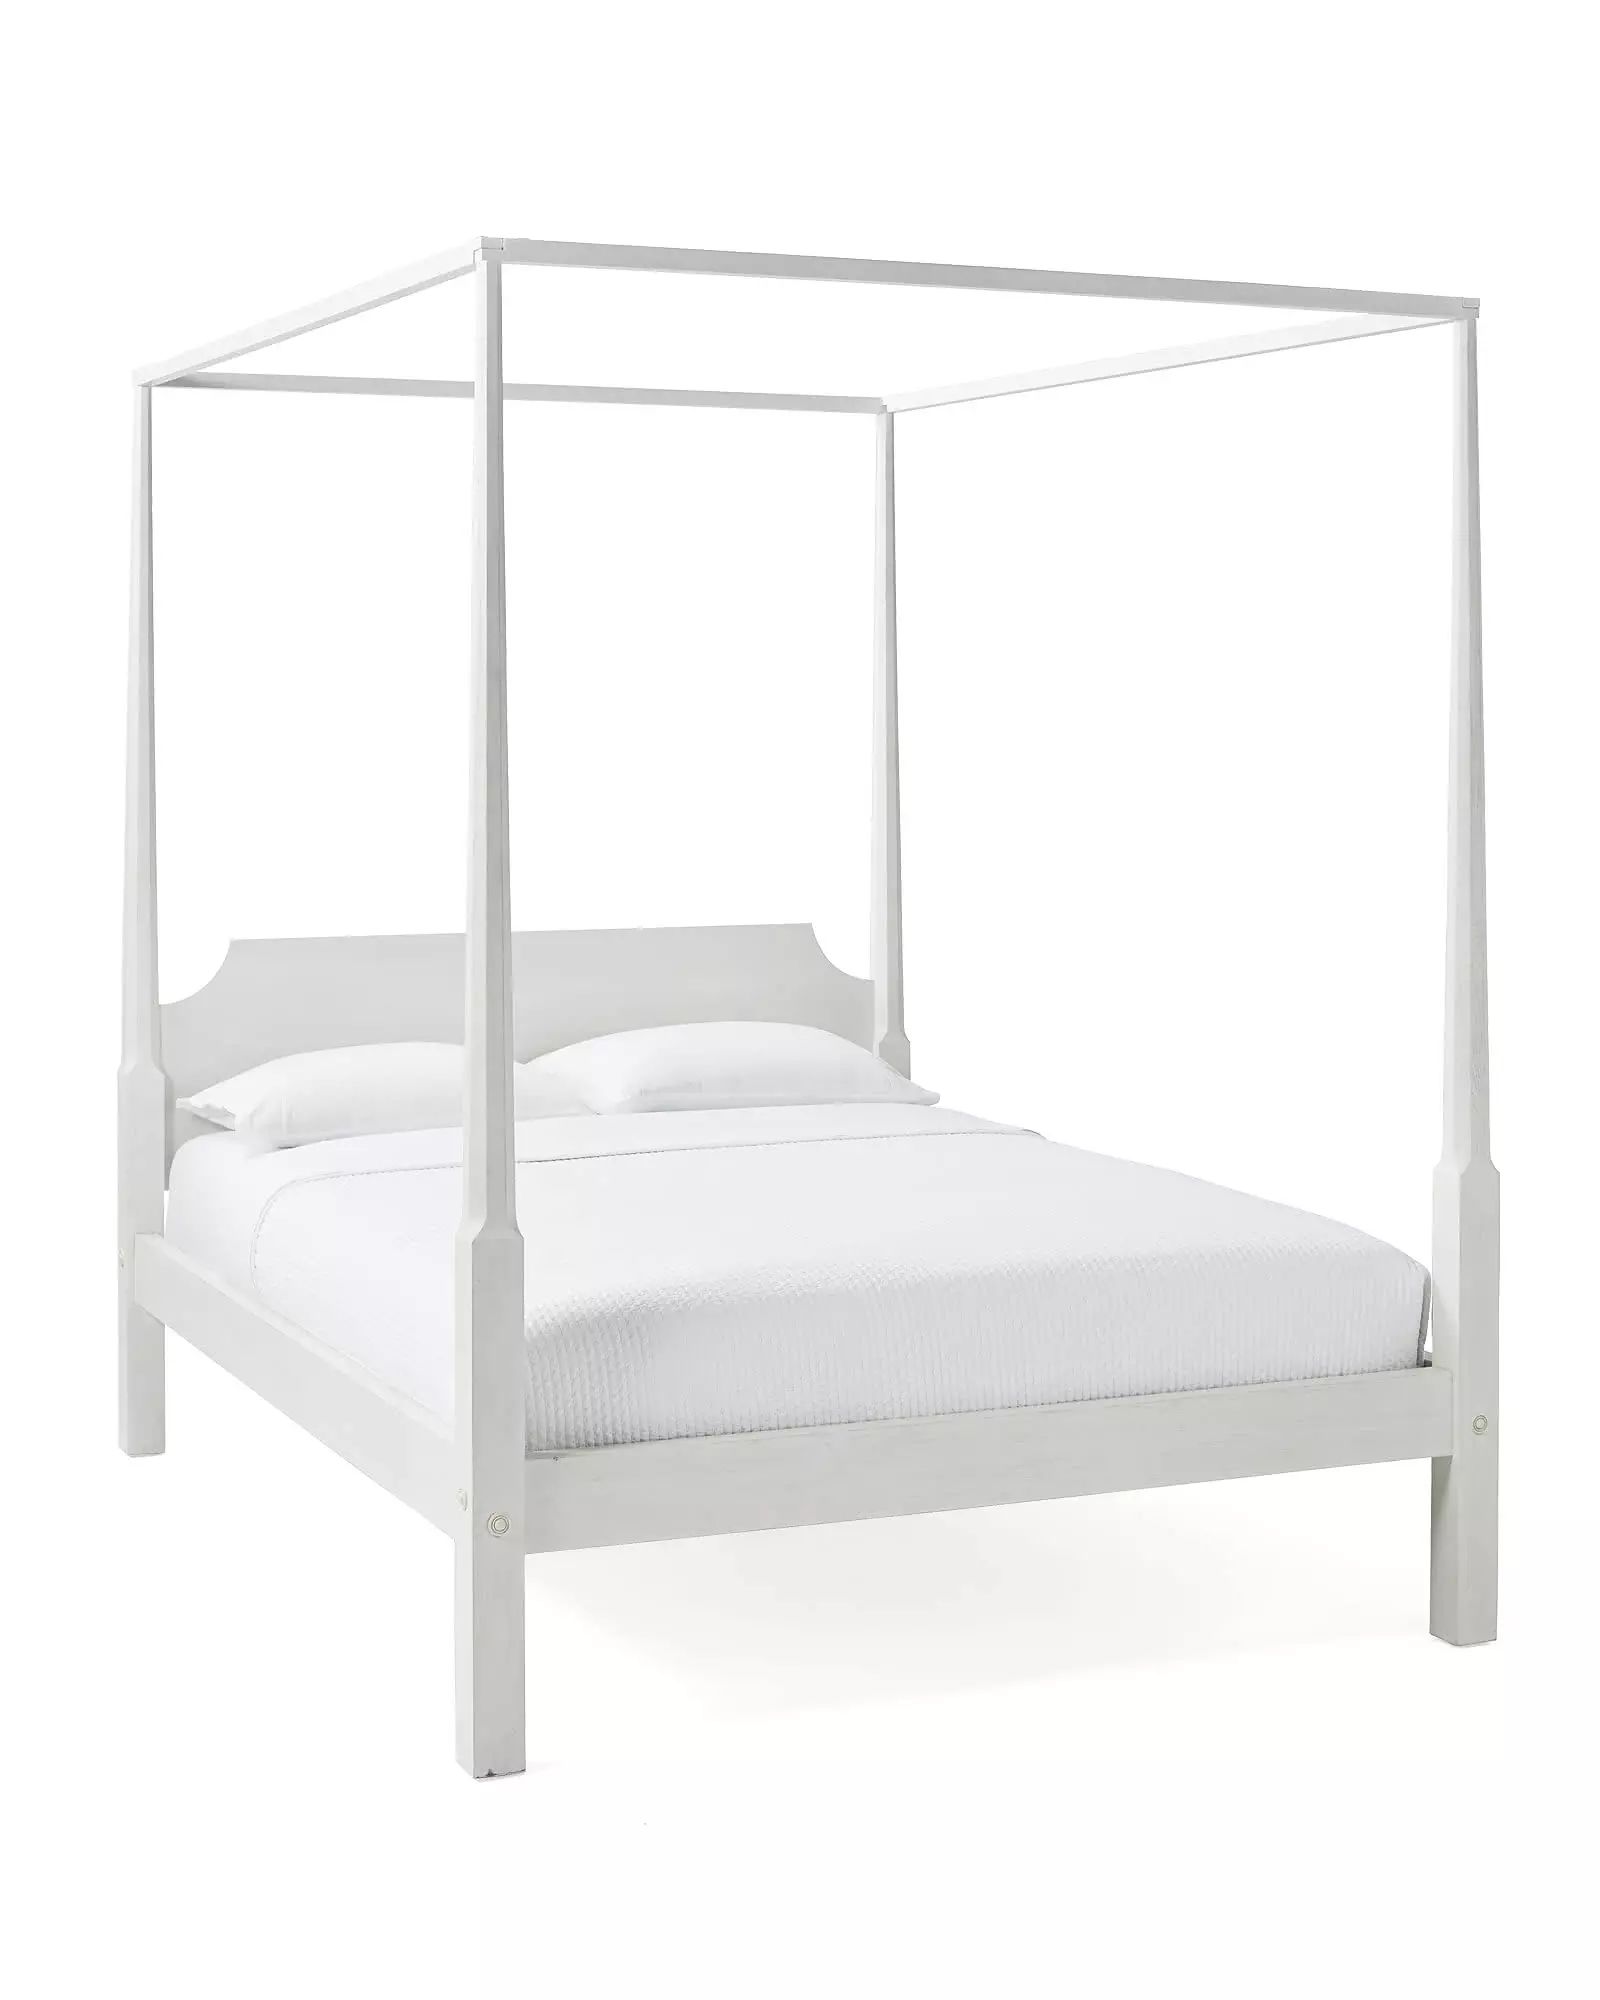 Whitaker Four Poster Bed - Twin | Serena and Lily